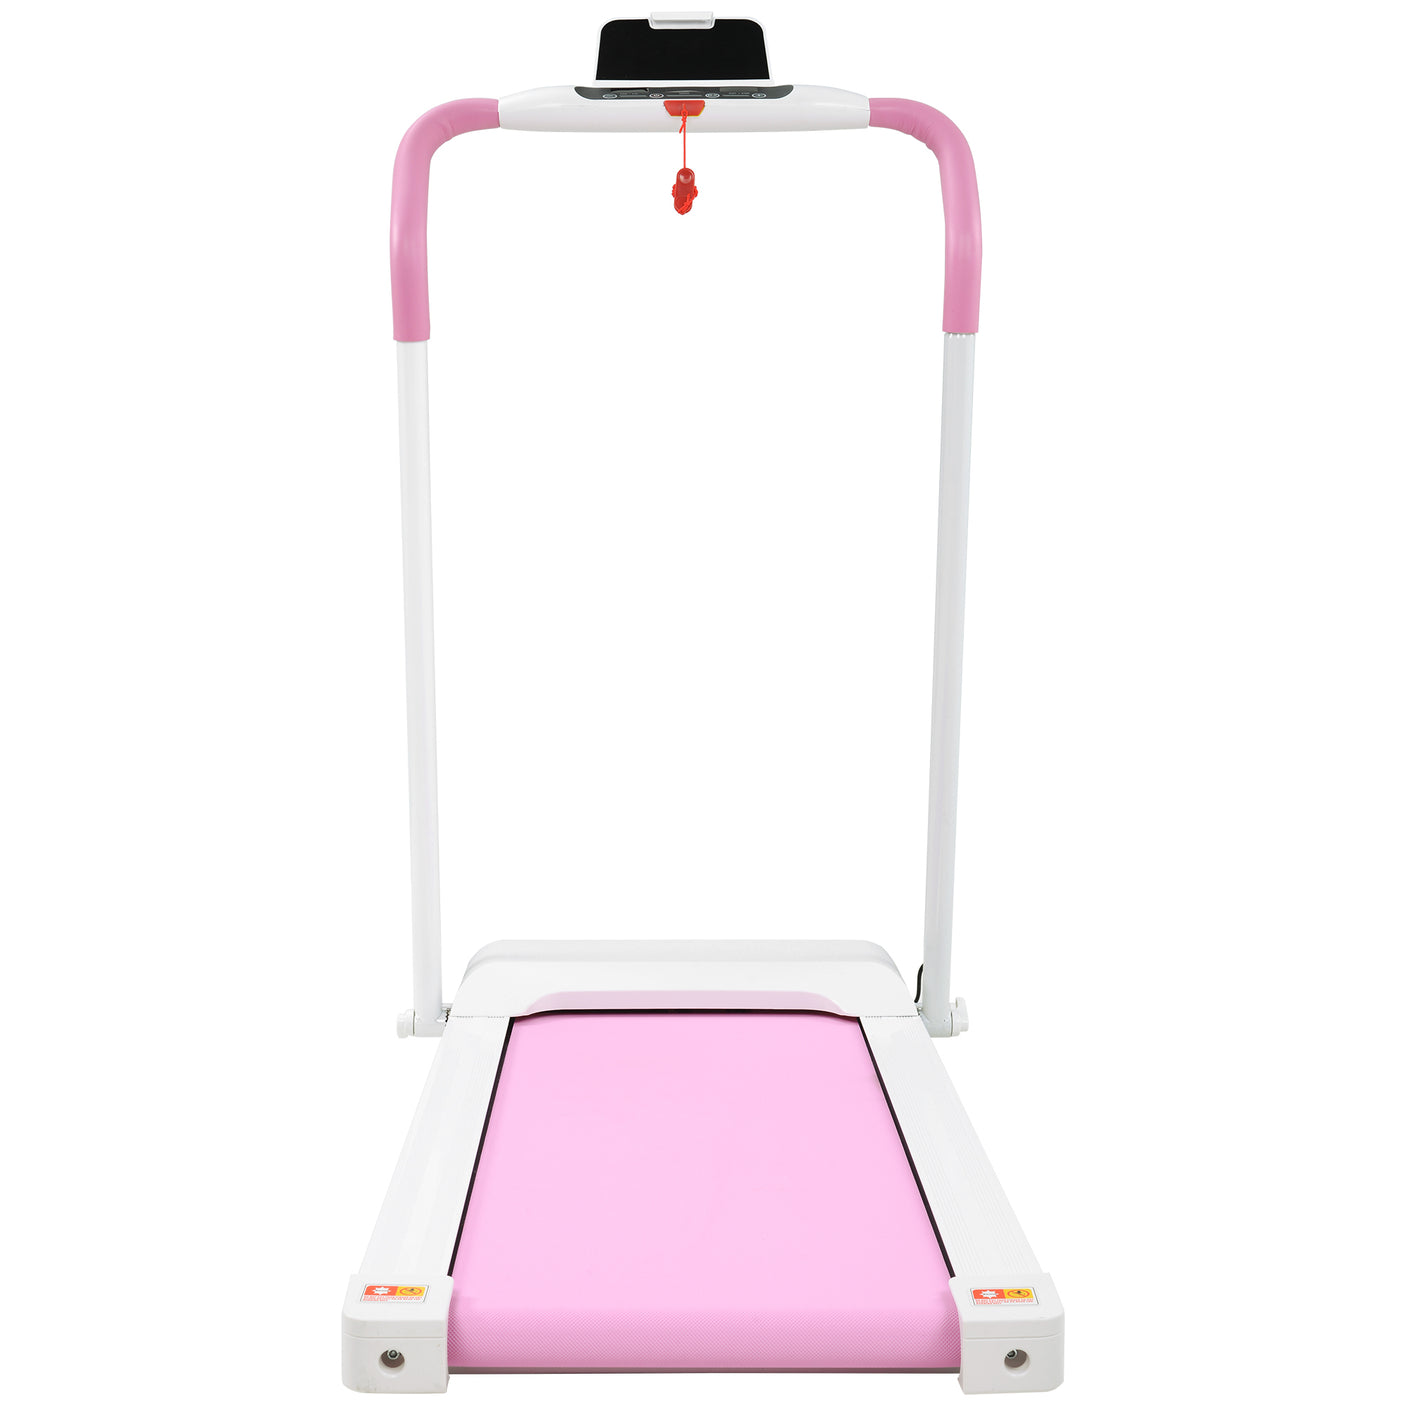 FYC Treadmill Folding Treadmill for Home Portable Electric Motorized Treadmill Running Exercise Machine Compact Treadmill for Home Gym Fitness Workout Walking, No Installation Required, White&Pink